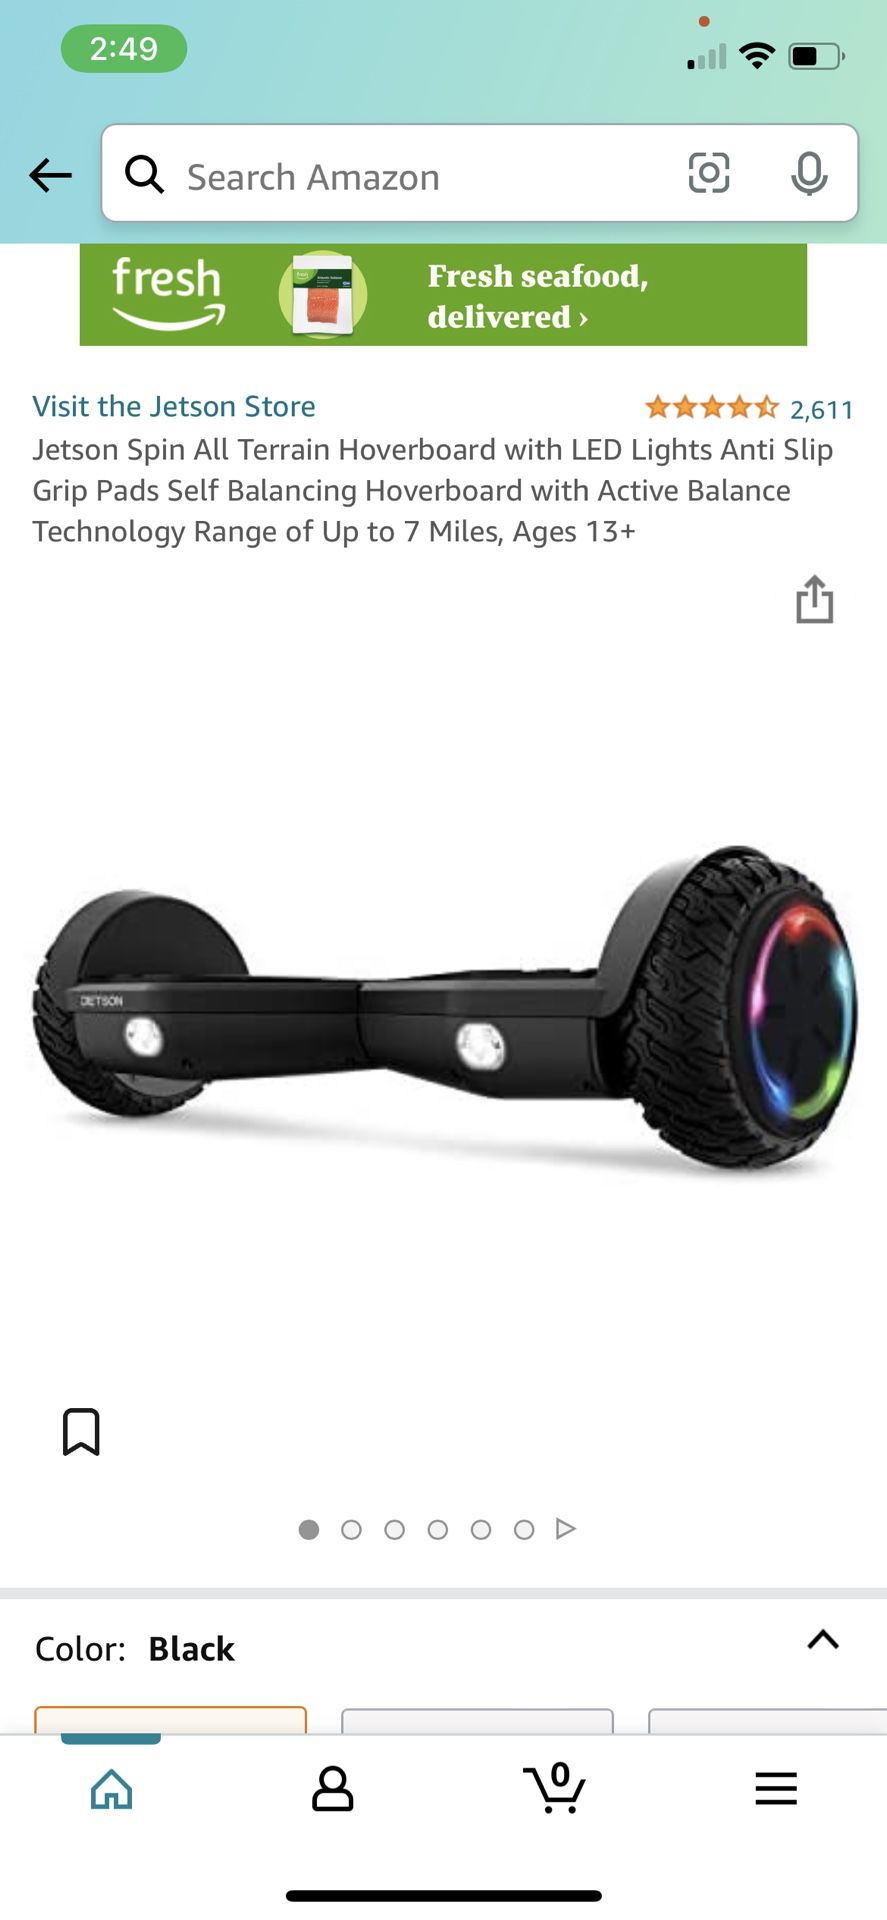 Jetson Spin All Terrain Hoverboard with LED Lights Anti Slip Grip Pads Self Balancing Hoverboard with Active Balance Technology Range of Up to 7 Miles